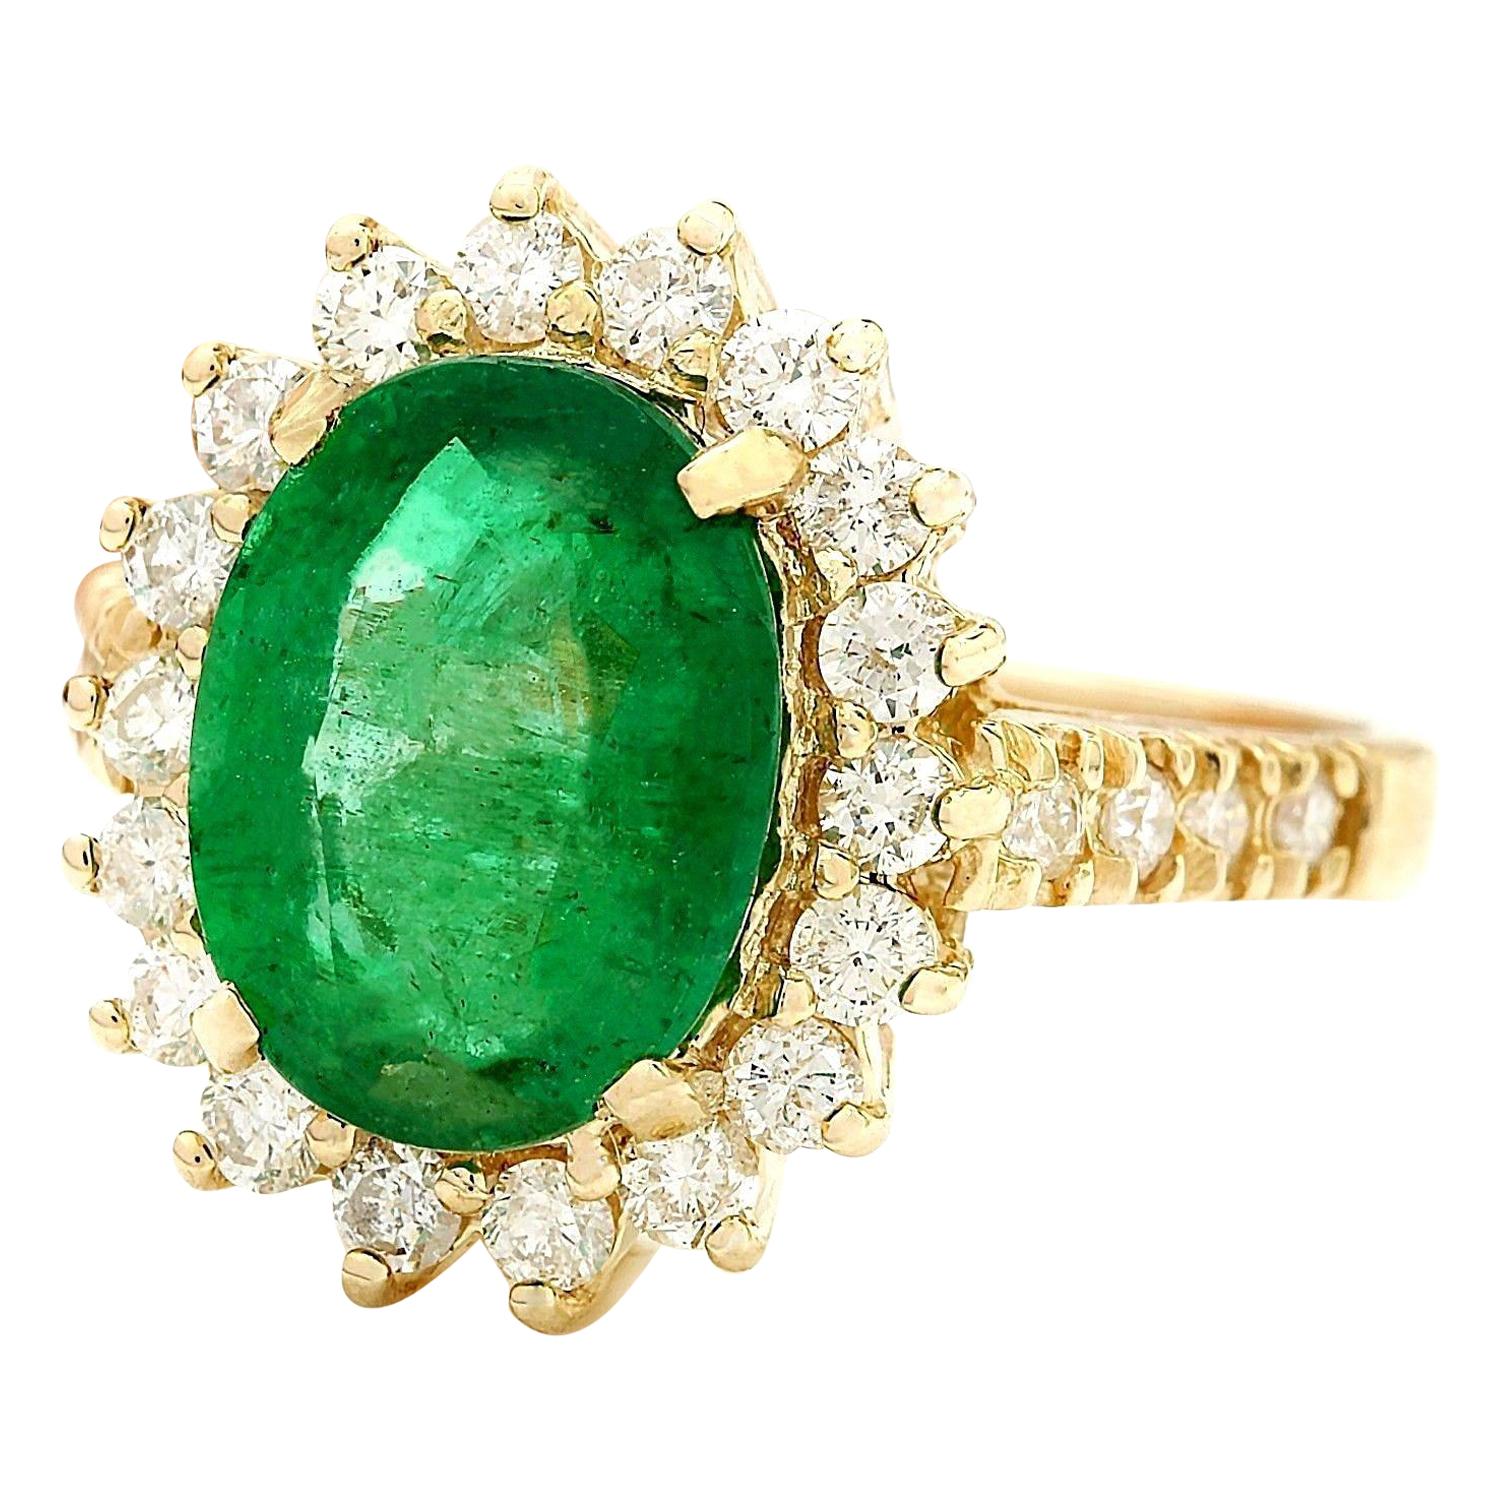 3.98 Carat Natural Emerald 14K Solid Yellow Gold Diamond Ring
 Item Type: Ring
 Item Style: Engagement
 Material: 14K Yellow Gold
 Mainstone: Emerald
 Stone Color: Green
 Stone Weight: 2.78 Carat
 Stone Shape: Oval
 Stone Quantity: 1
 Stone